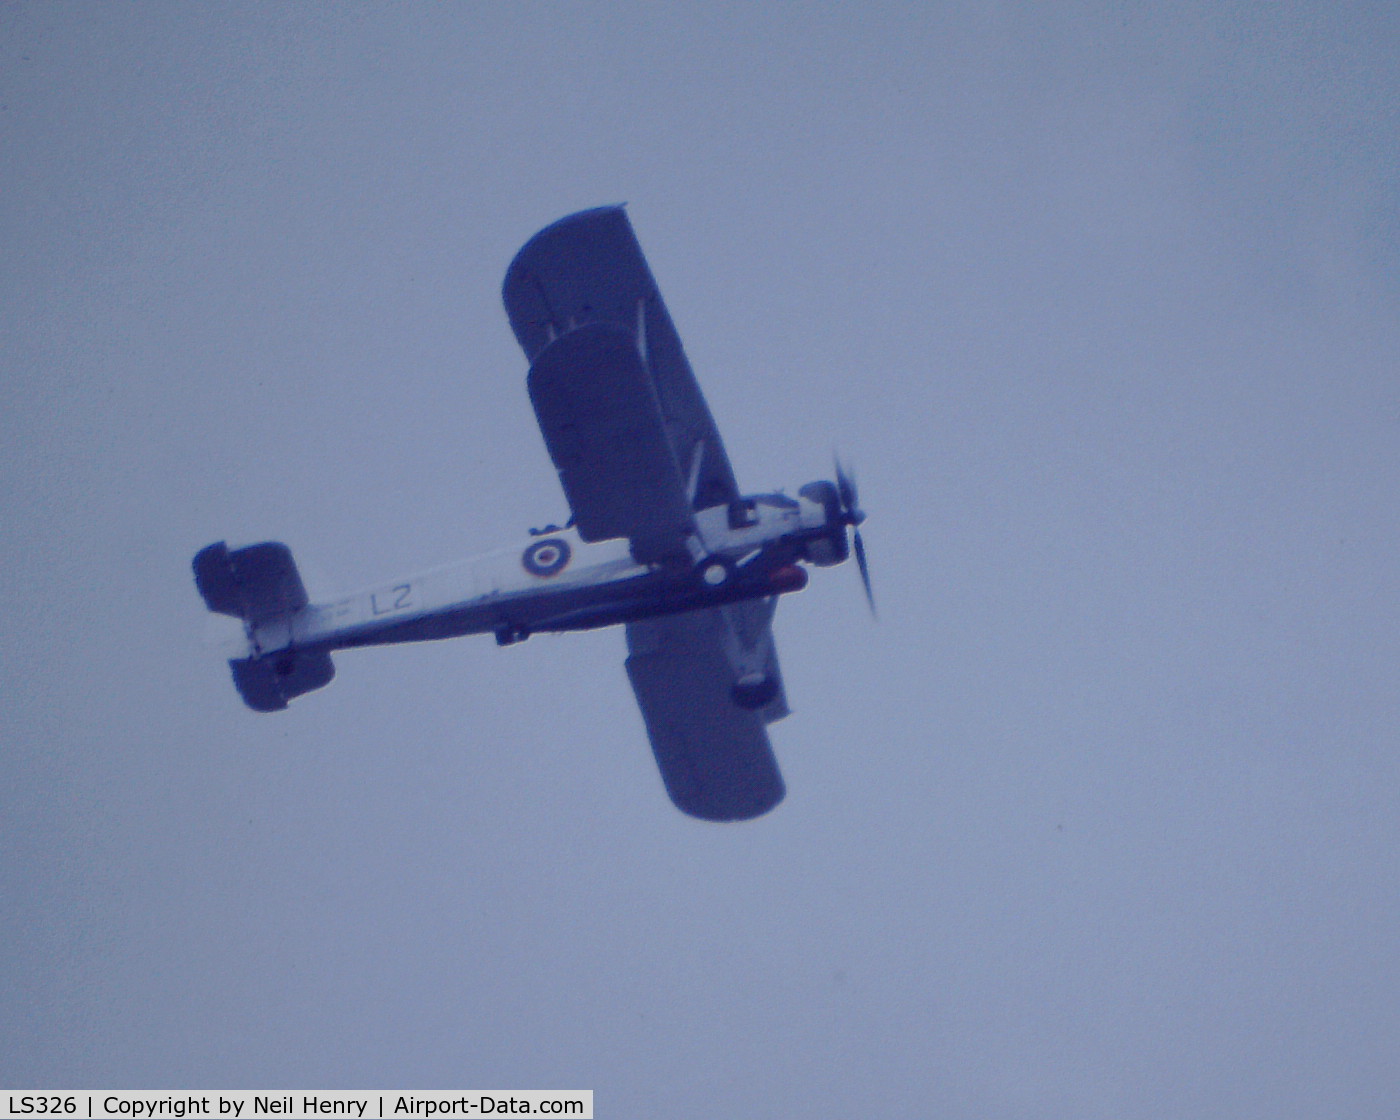 LS326, 1943 Fairey Swordfish Mk.II C/N Not found LS326, Scanned from original slide- taken 1989 flying over the 'Tall Ships Race' in the River Thames at Woolwick, UK 0n a very dull day with drizzly rain.